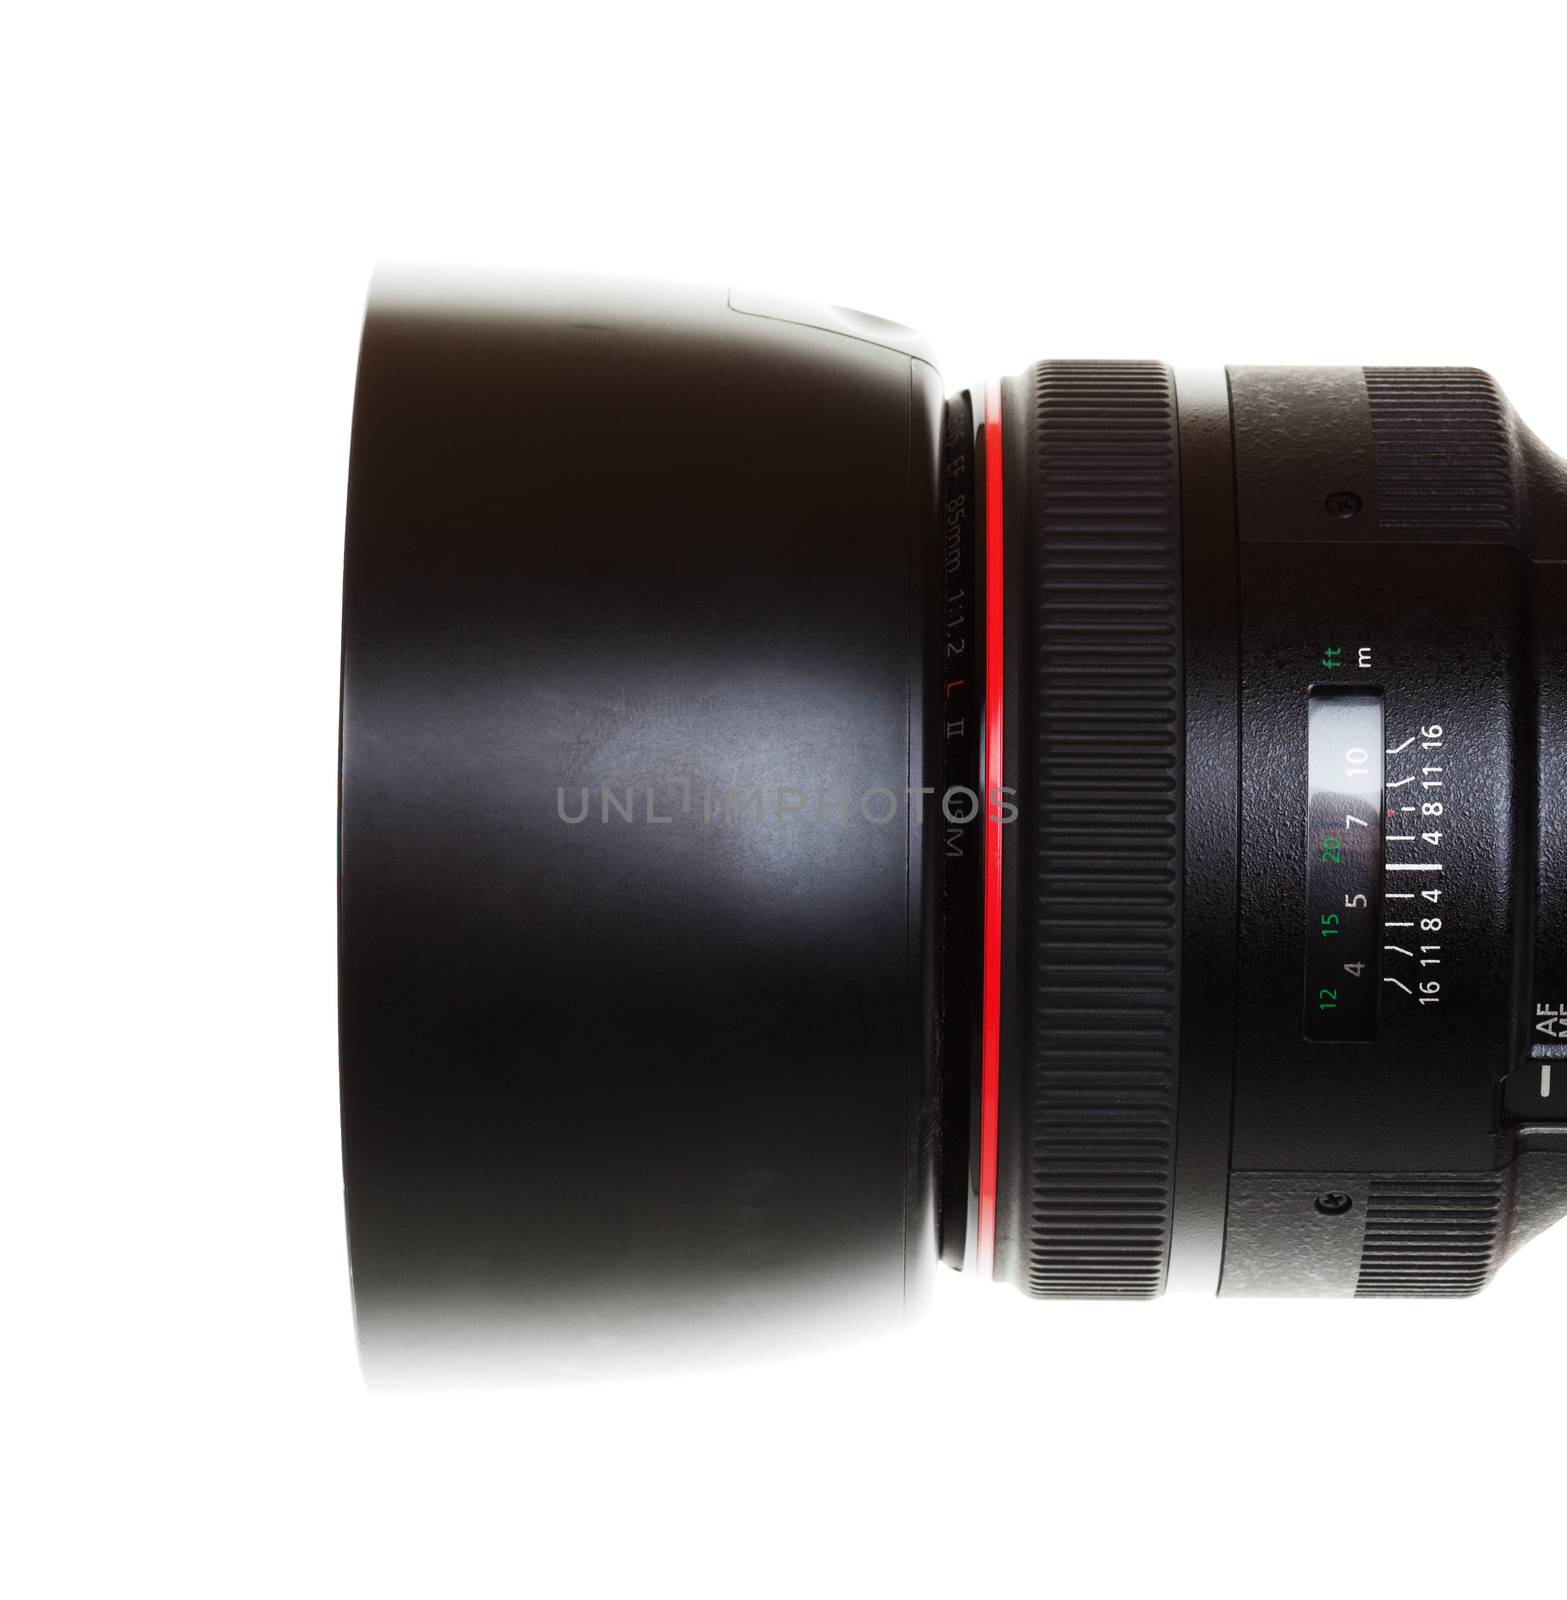 An 85mm prime SLR camera lens with clipping path.